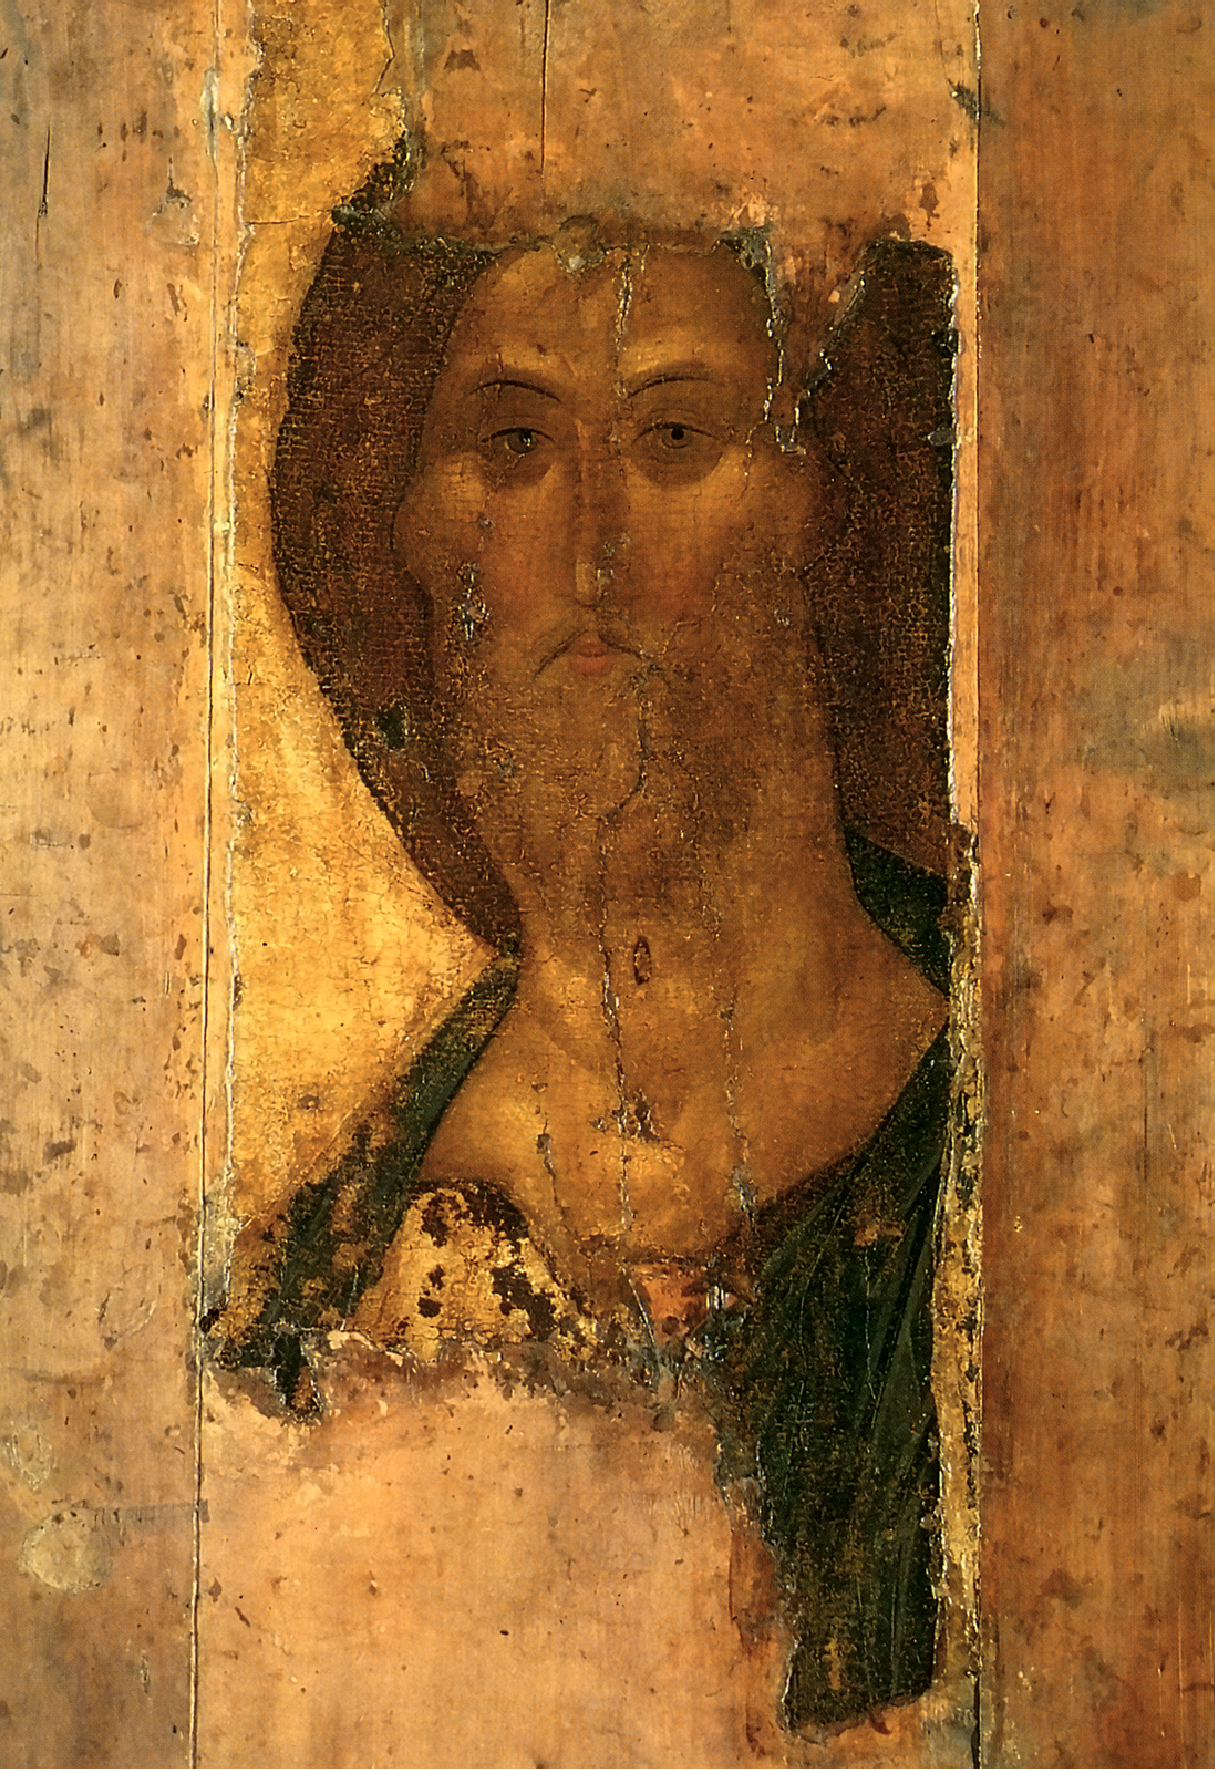 The wooden icon of Jesus Christ "Savior" by the icon painter Andrei Rublev 